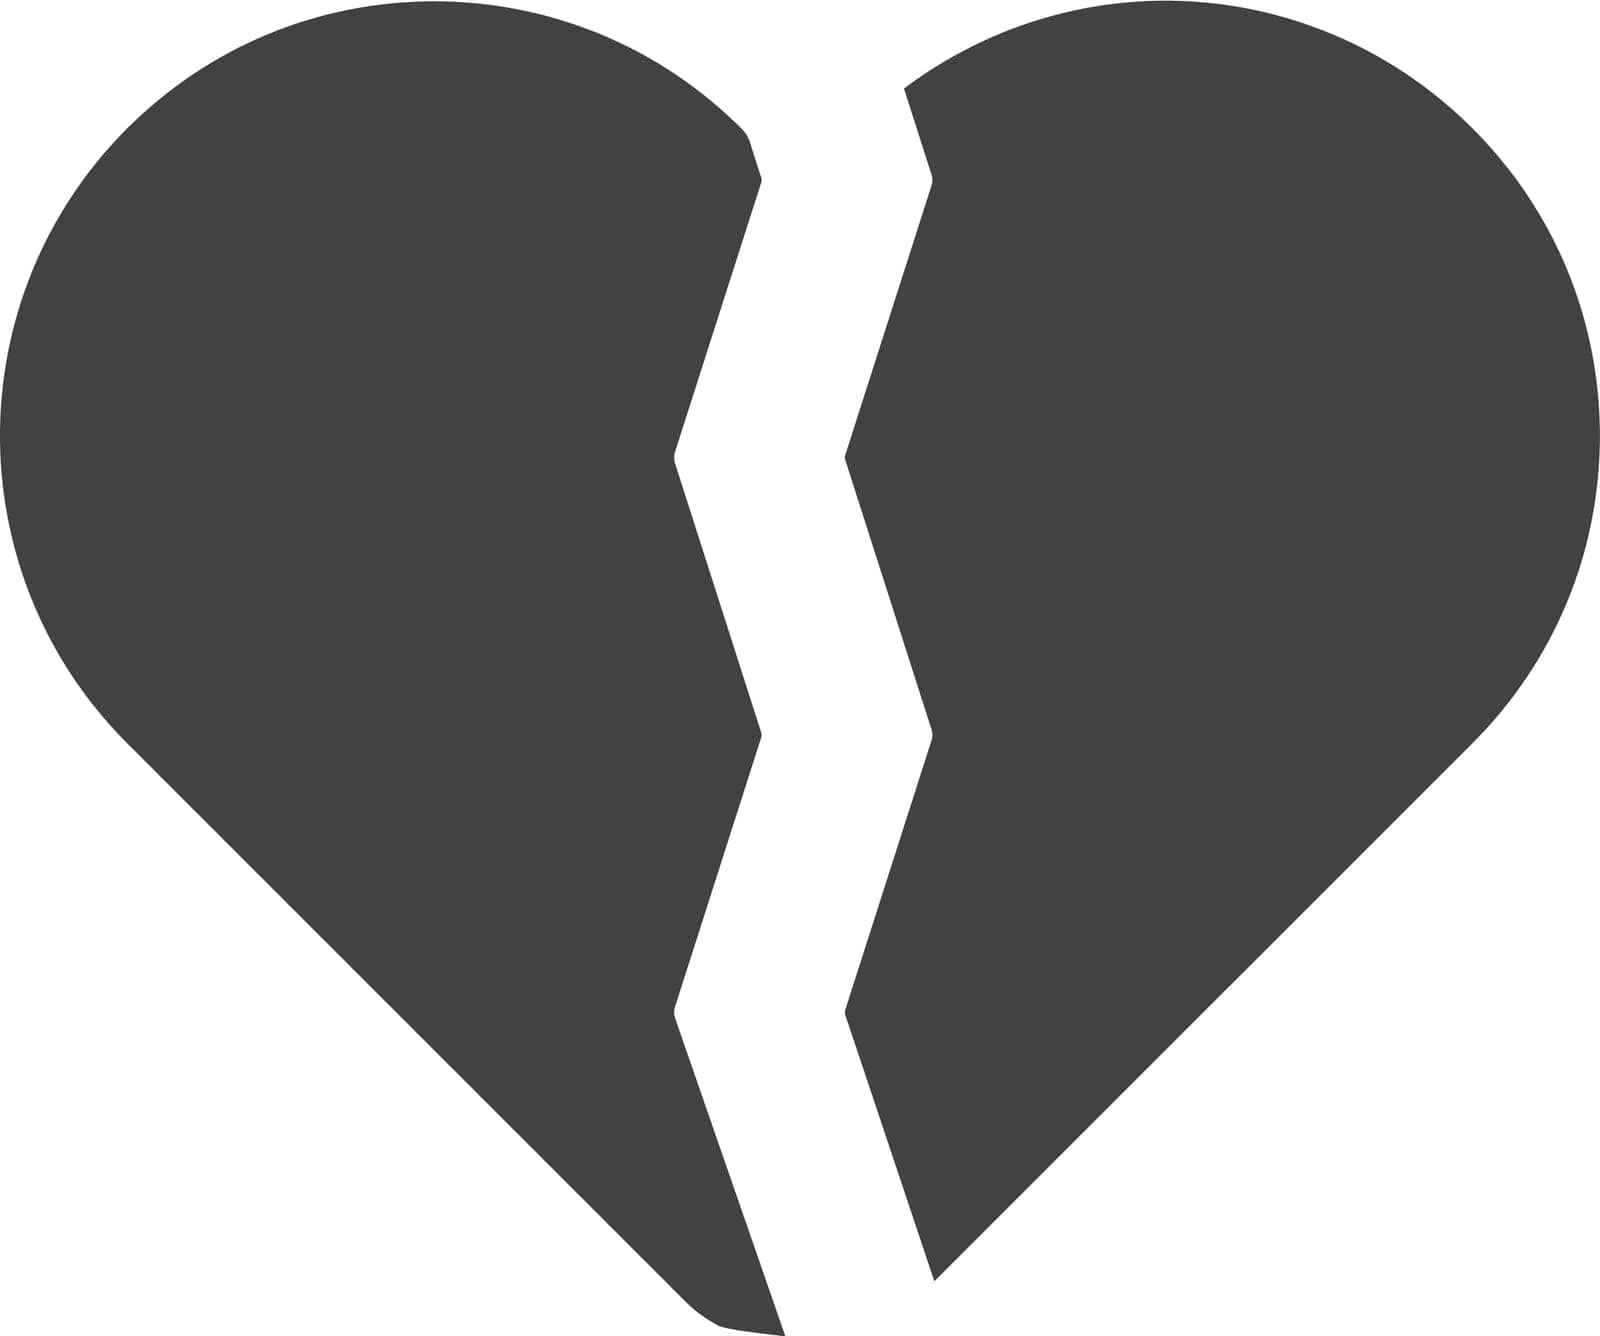 Broken Heart icon vector image. Suitable for mobile application web application and print media.